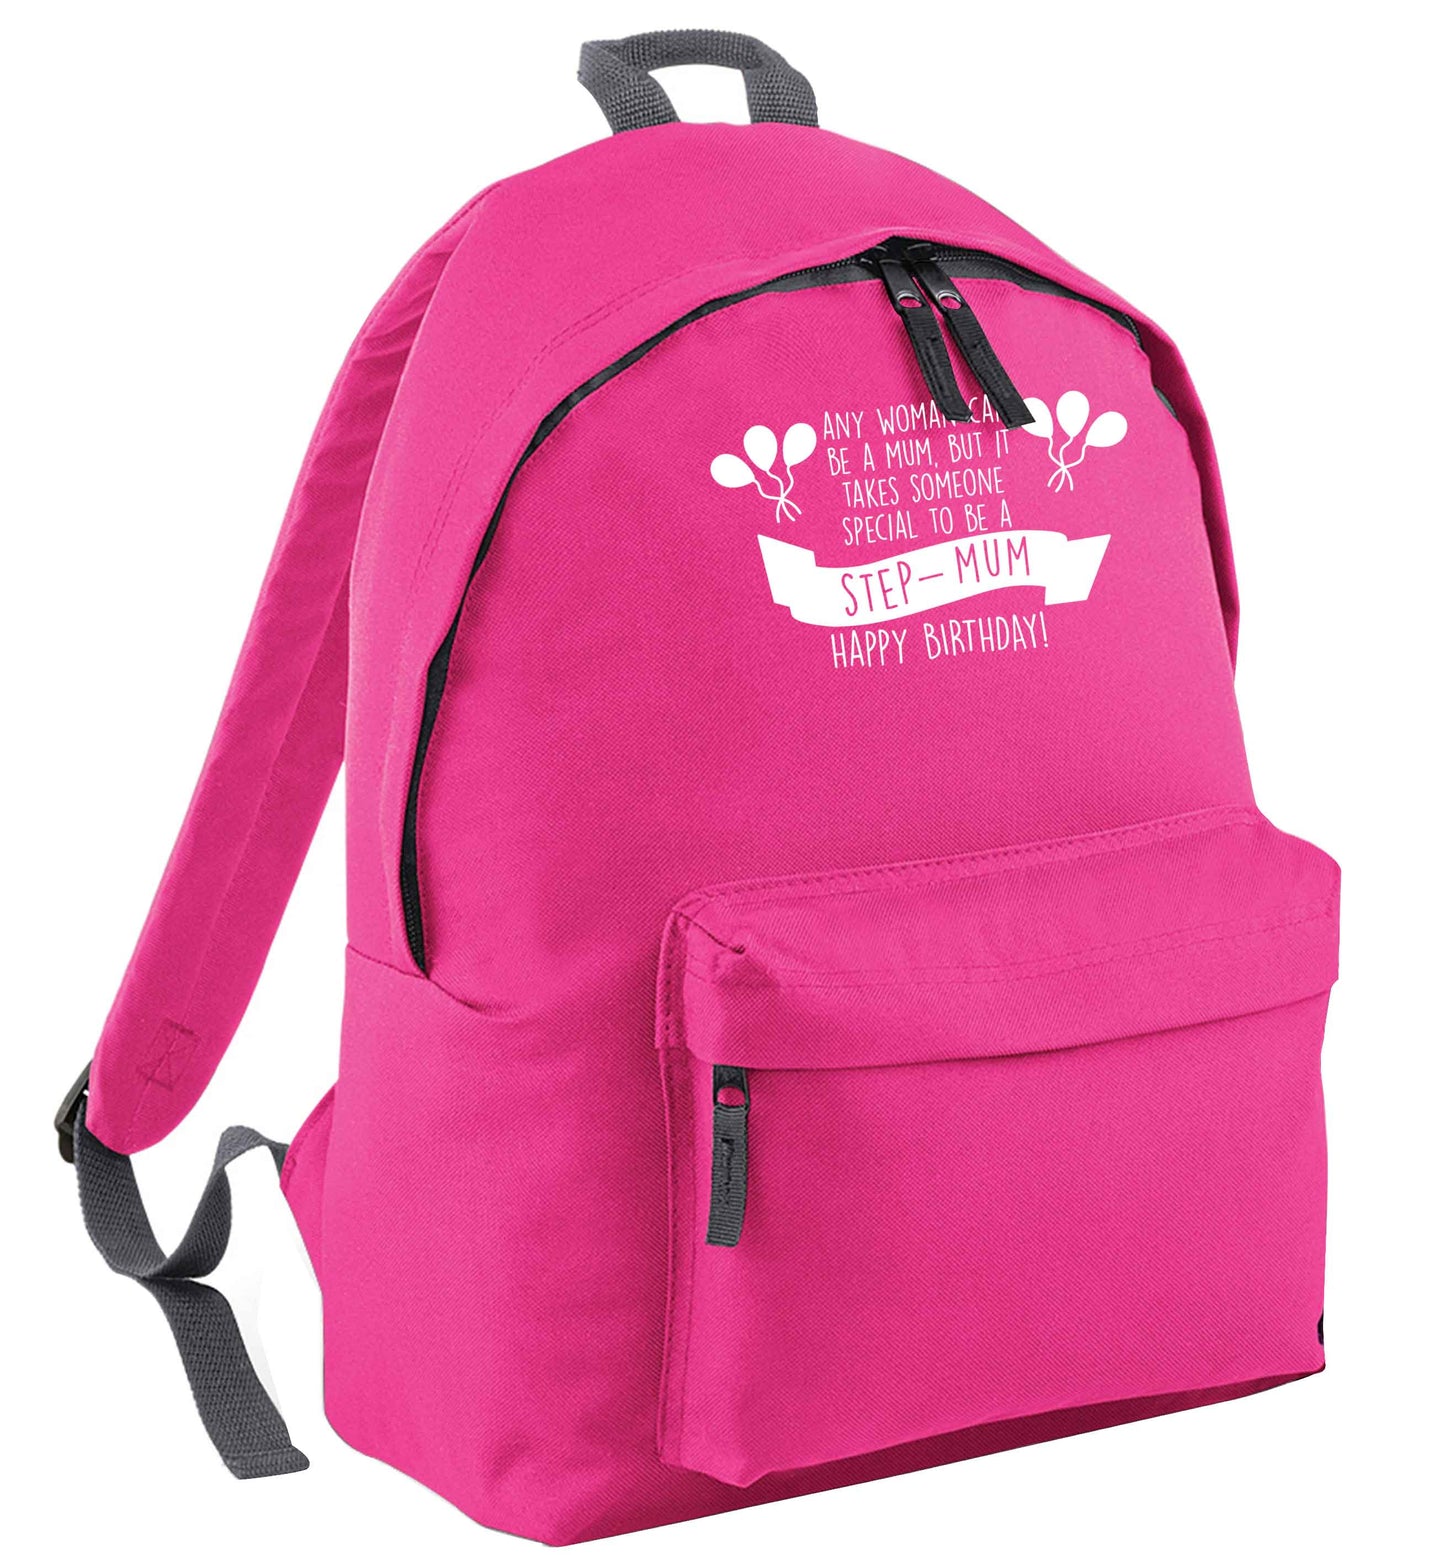 Takes someone special to be a step-mum, happy birthday! pink adults backpack